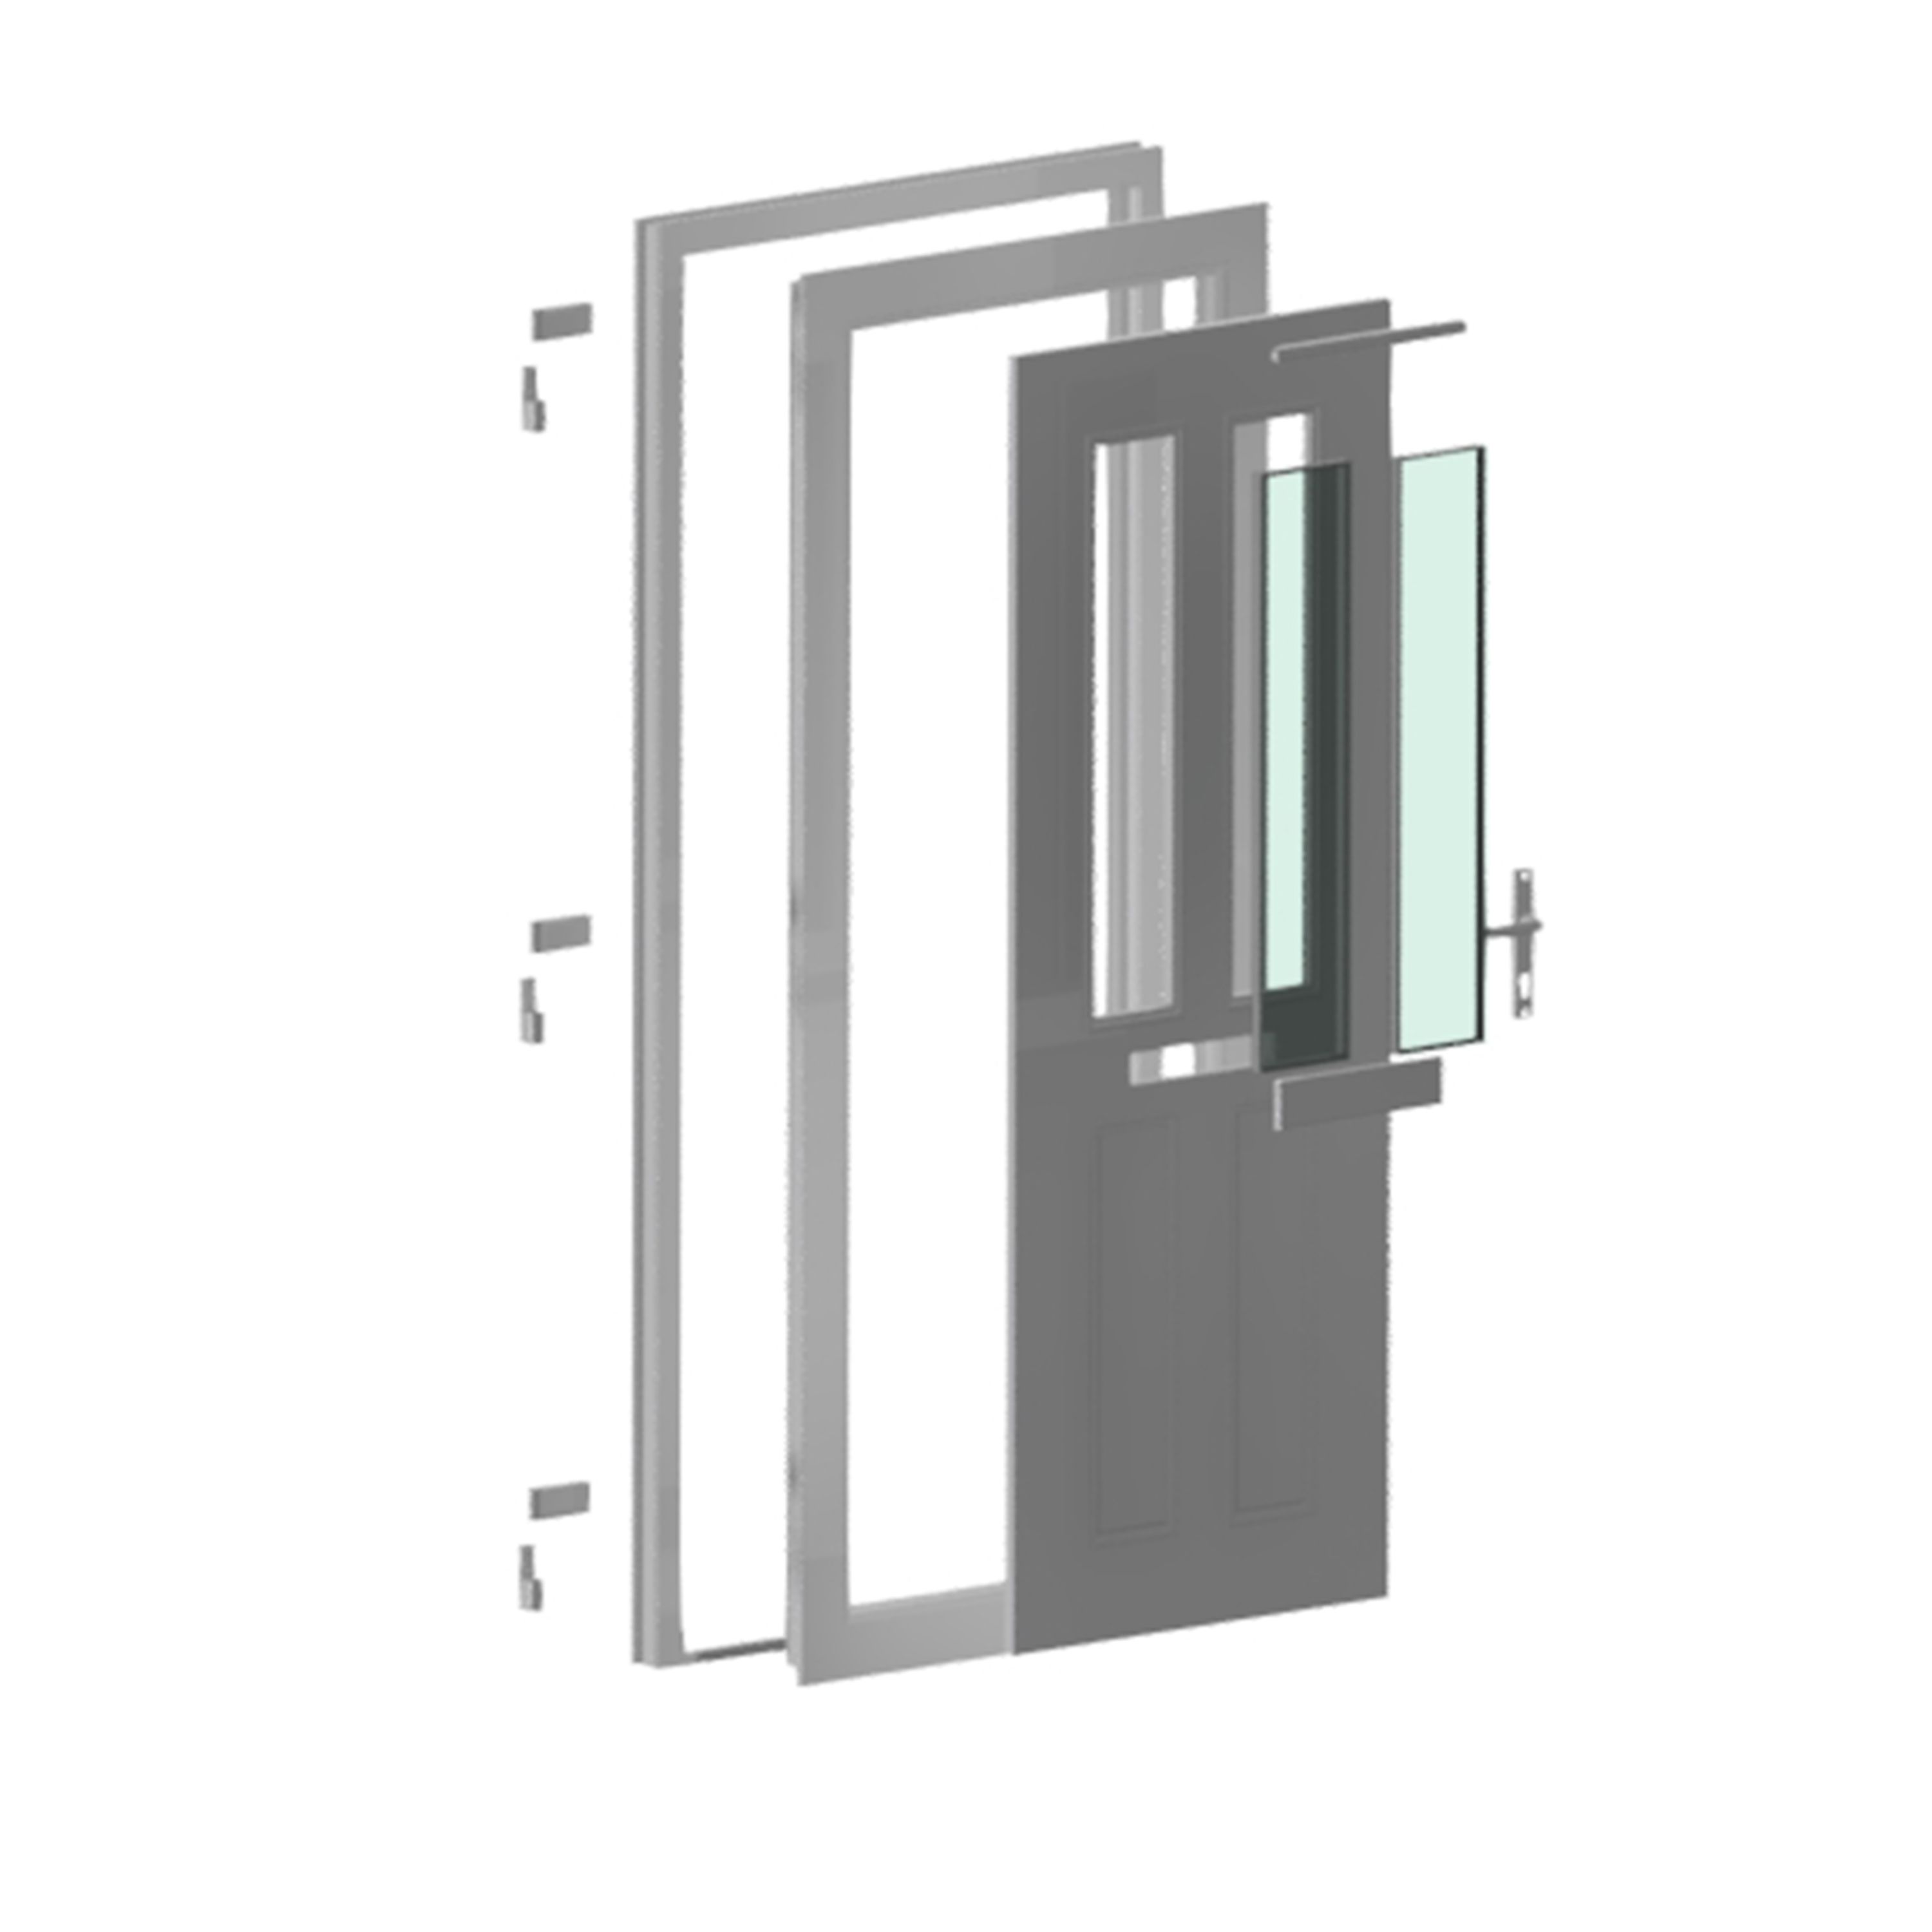 Fortia Chesil Frosted Glazed Anthracite LH External Front Door set, (H)2085mm (W)920mm